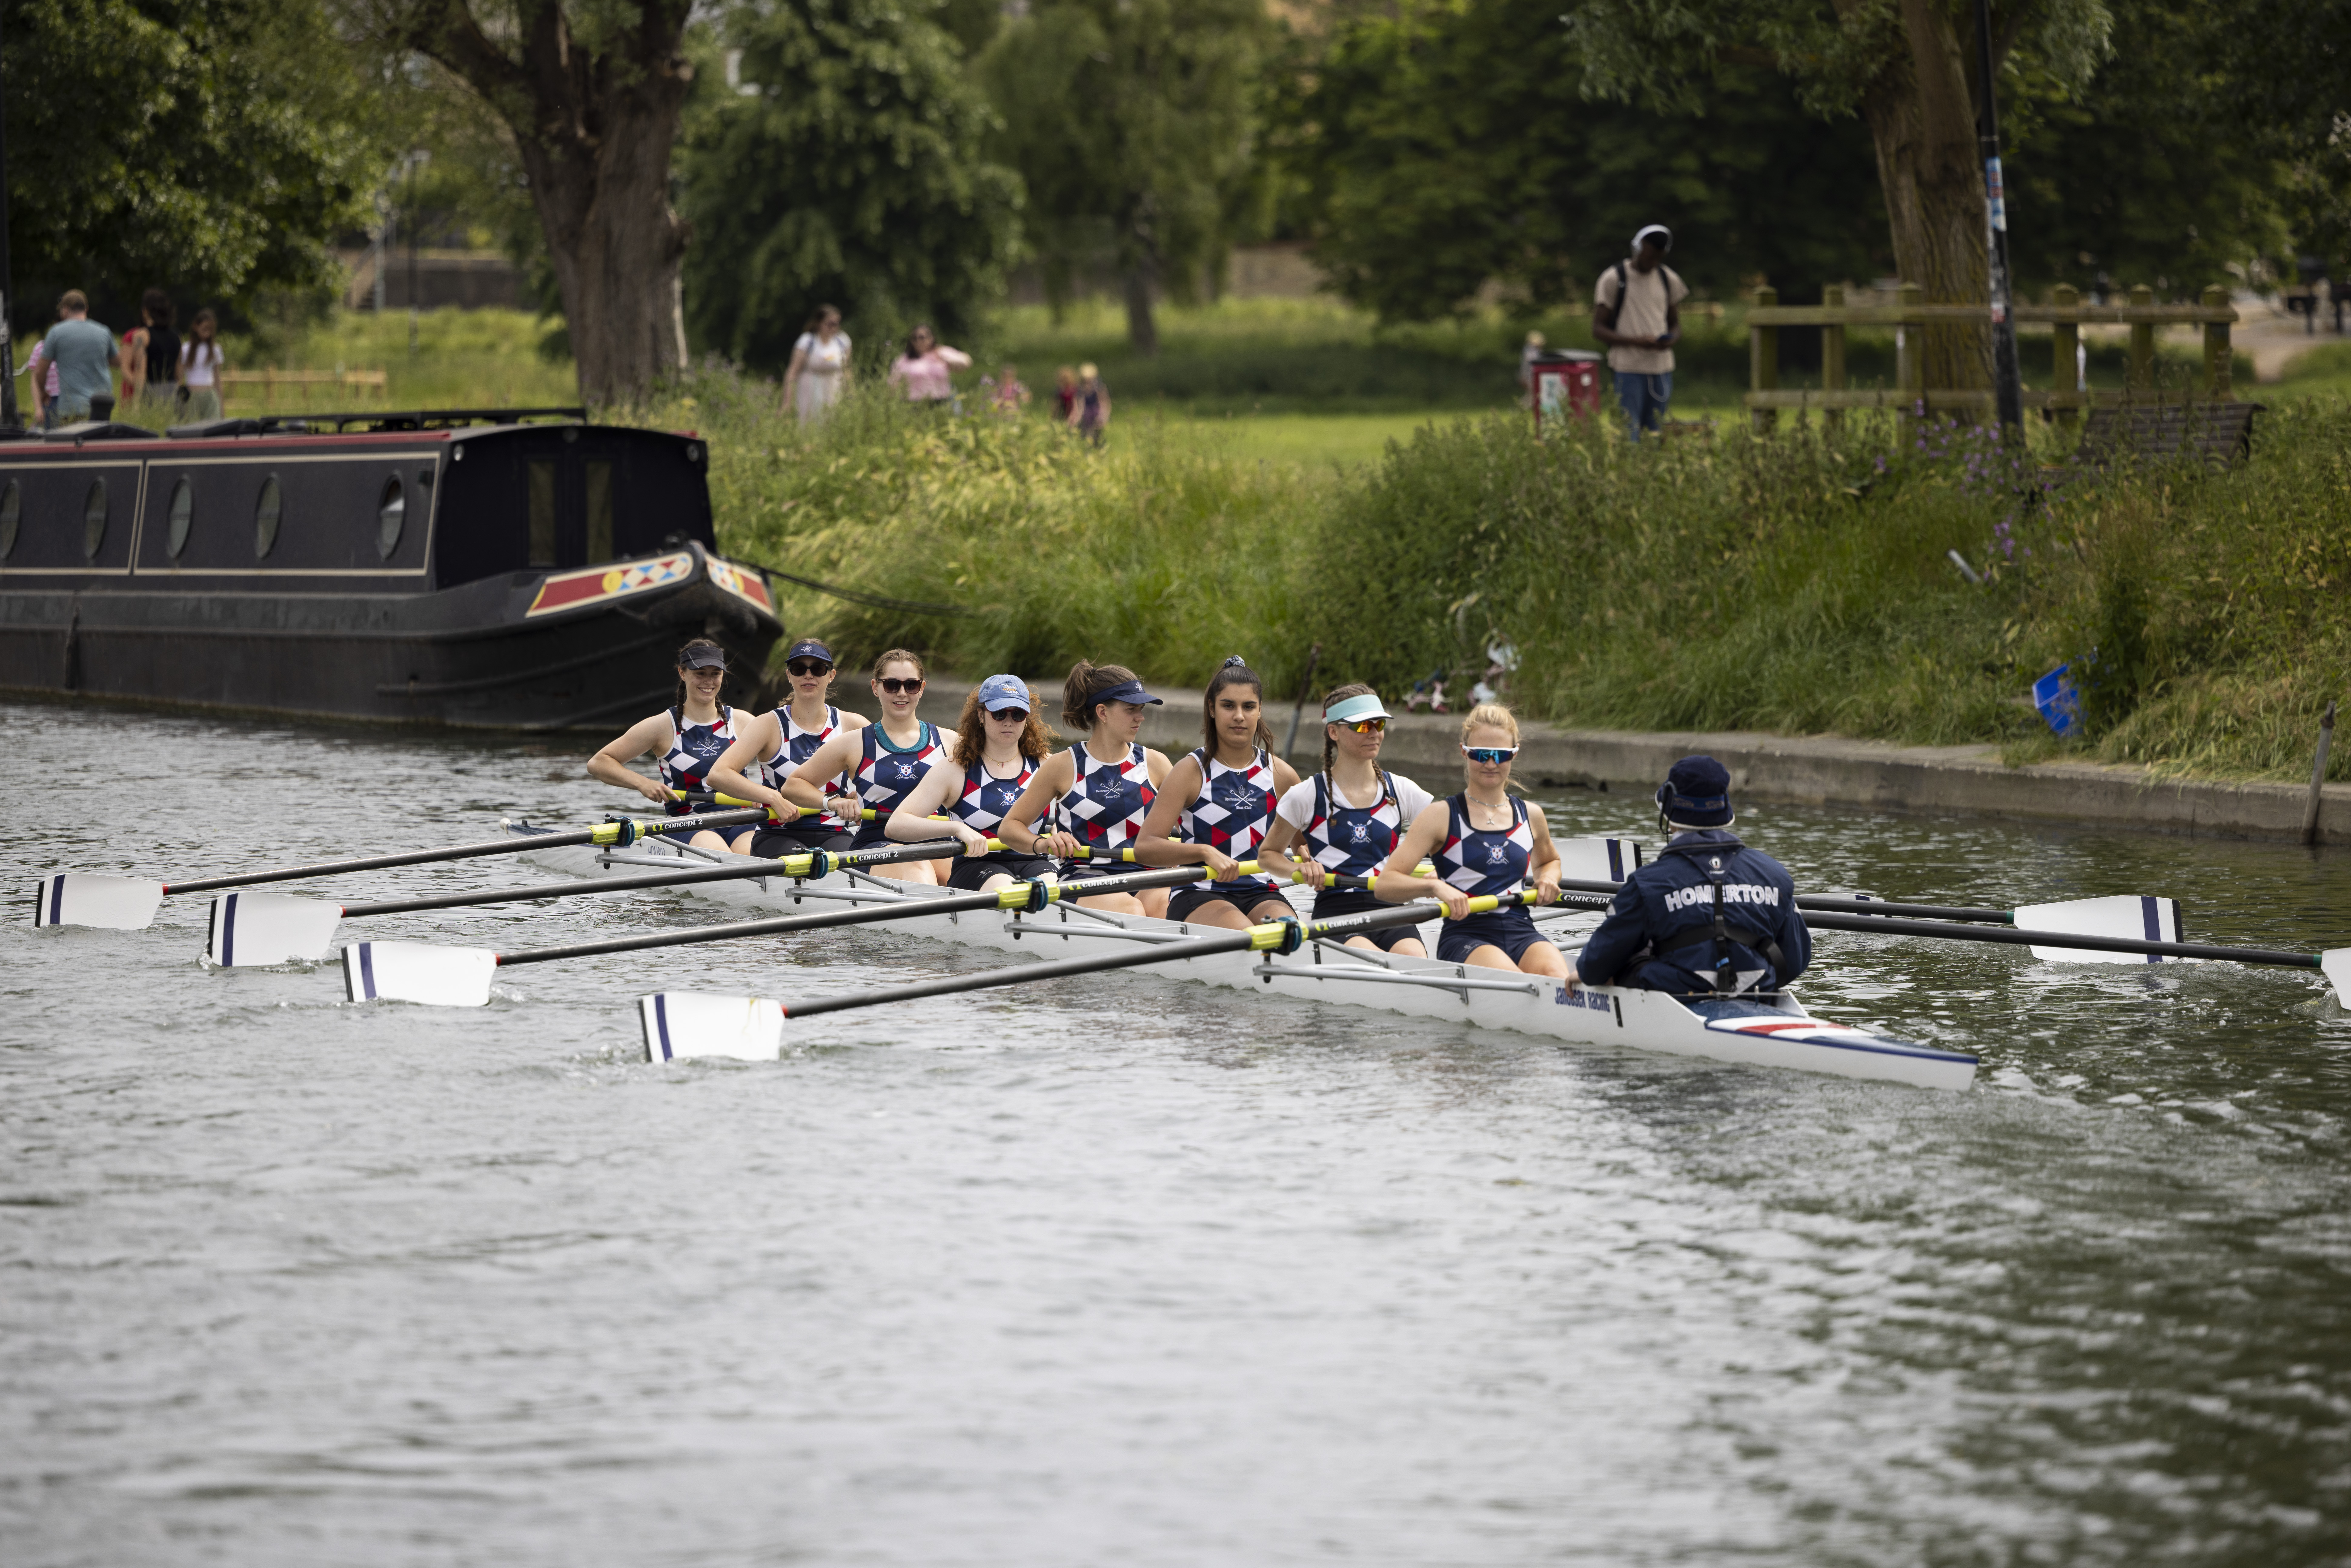 HCBC women's rowing team on the Cam